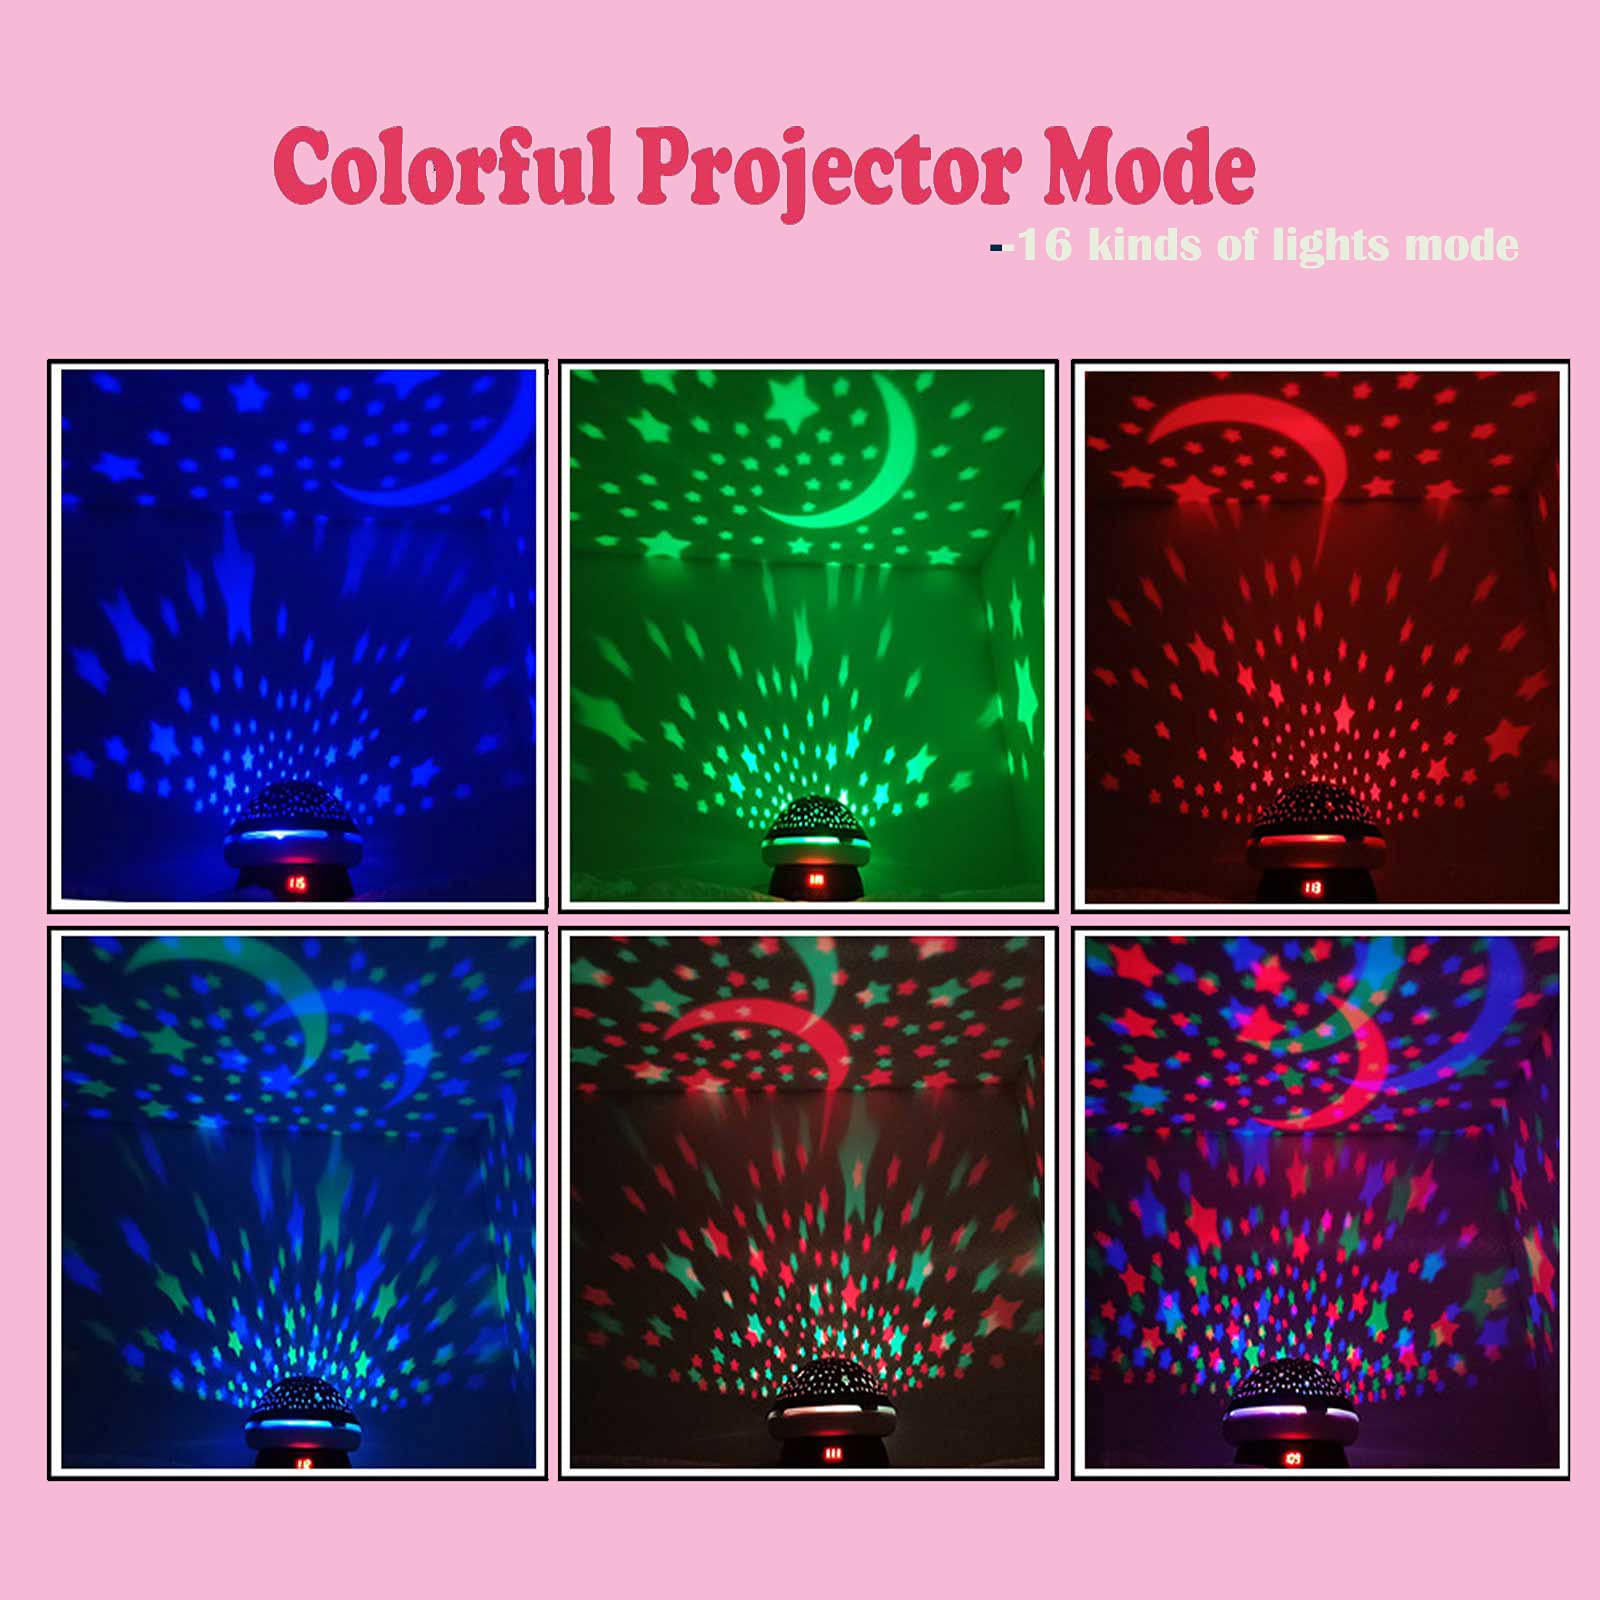 Toys for 3-8 Year Old Girls,Timer Rotation Star Projector Night Light Kids Twinkle Lights, 2-9 Year Olds Girl Gifts Kawaii Birthday Christmas Present for Kids,Gifts for Teen Toddler Baby Girls